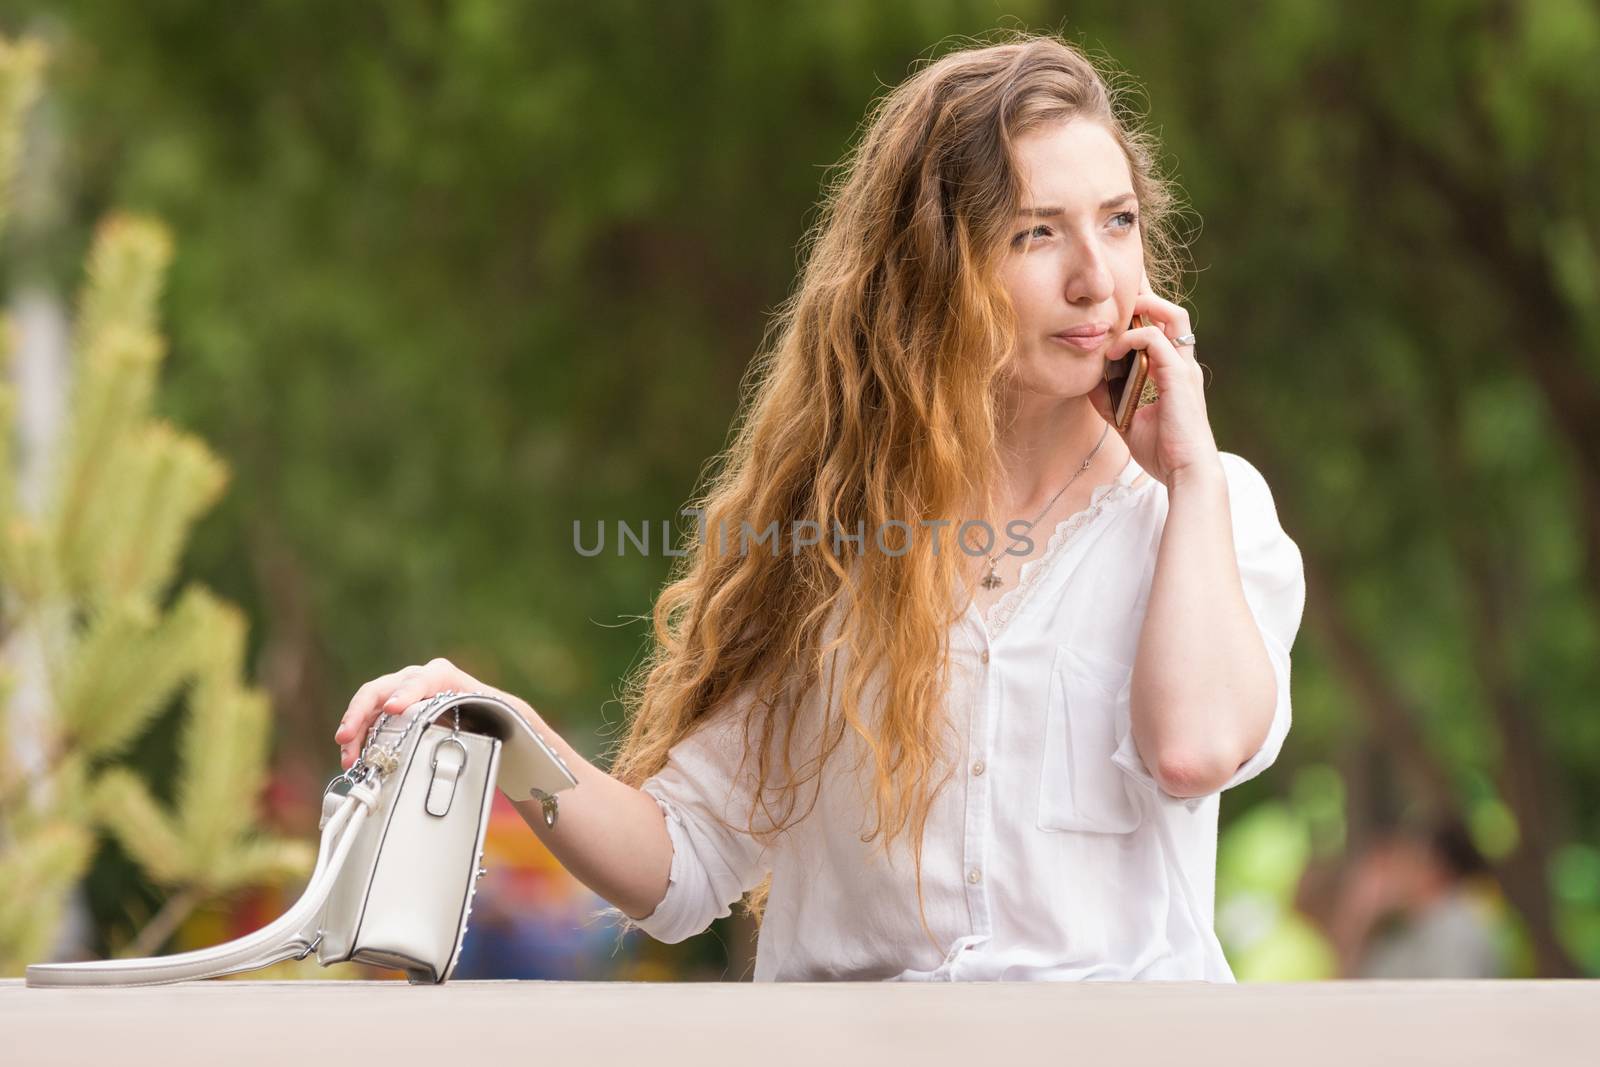 Young girl with a handbag talking on the phone